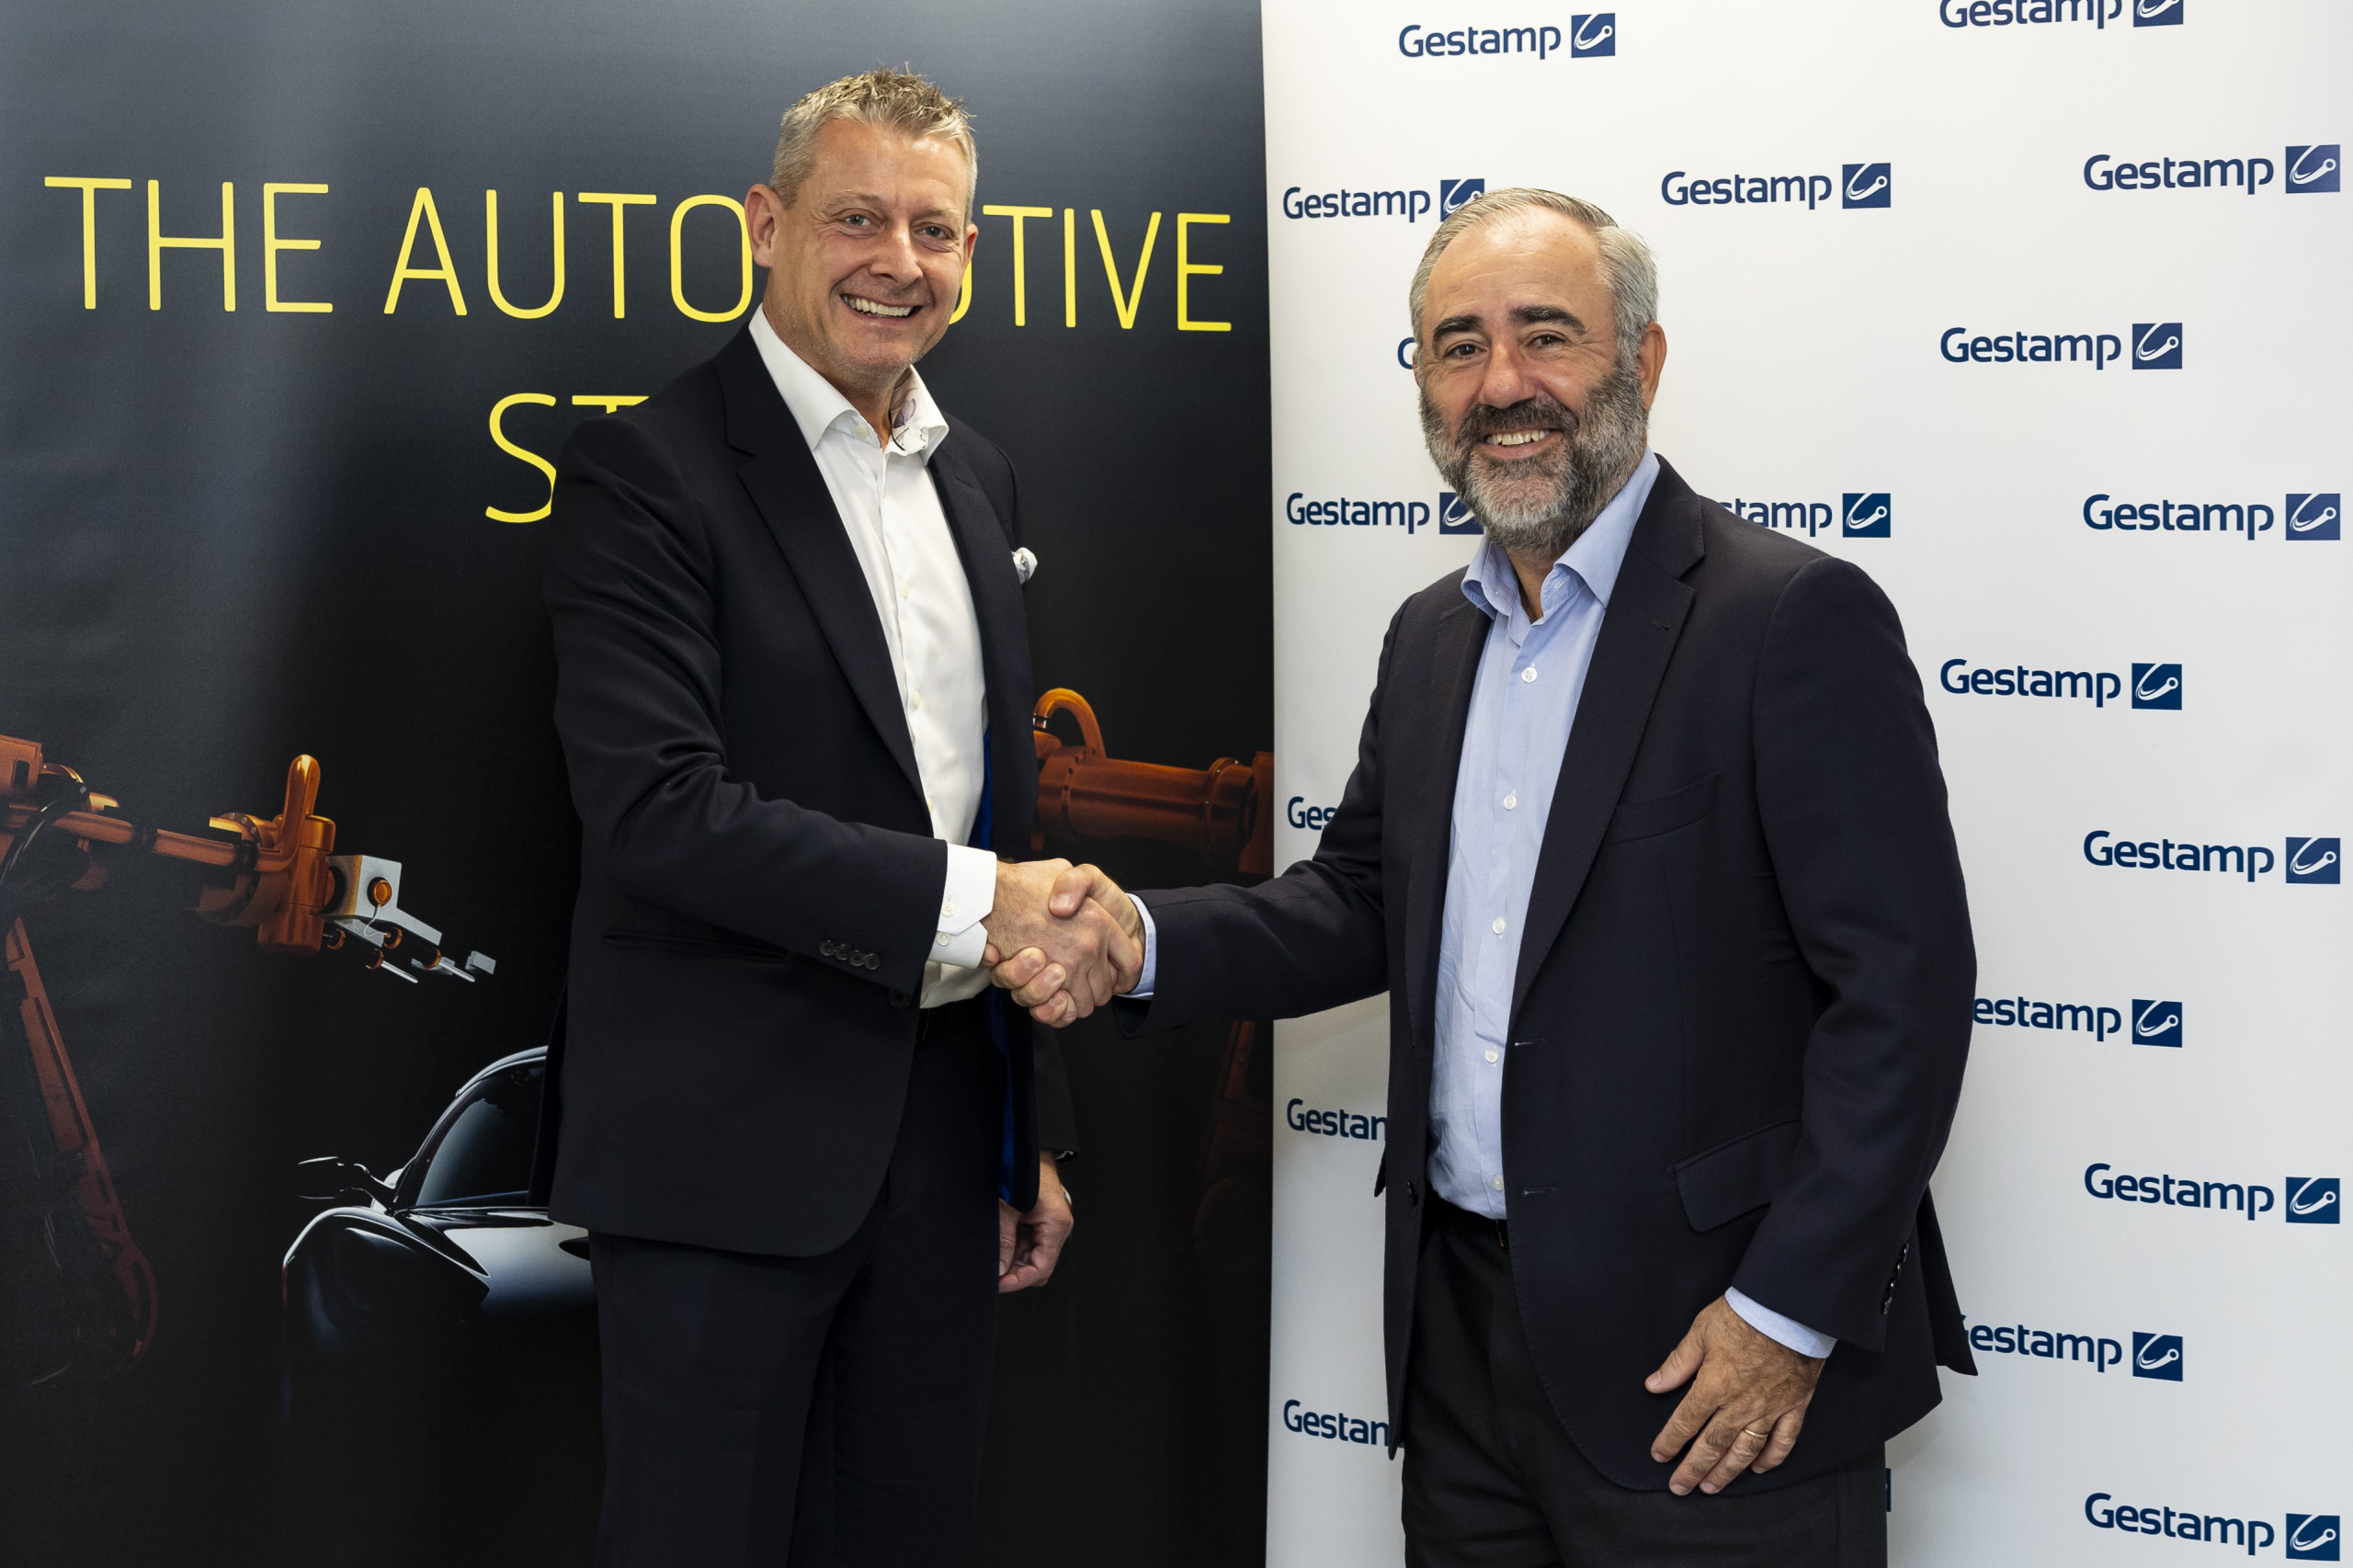 Tony Harris (l.), Head of Sales and Business Development at SSAB Europe, and Javier Imaz, CPO (Chief Procurement Officer) at Gestamp, have reached a forward-looking agreement. © Cision